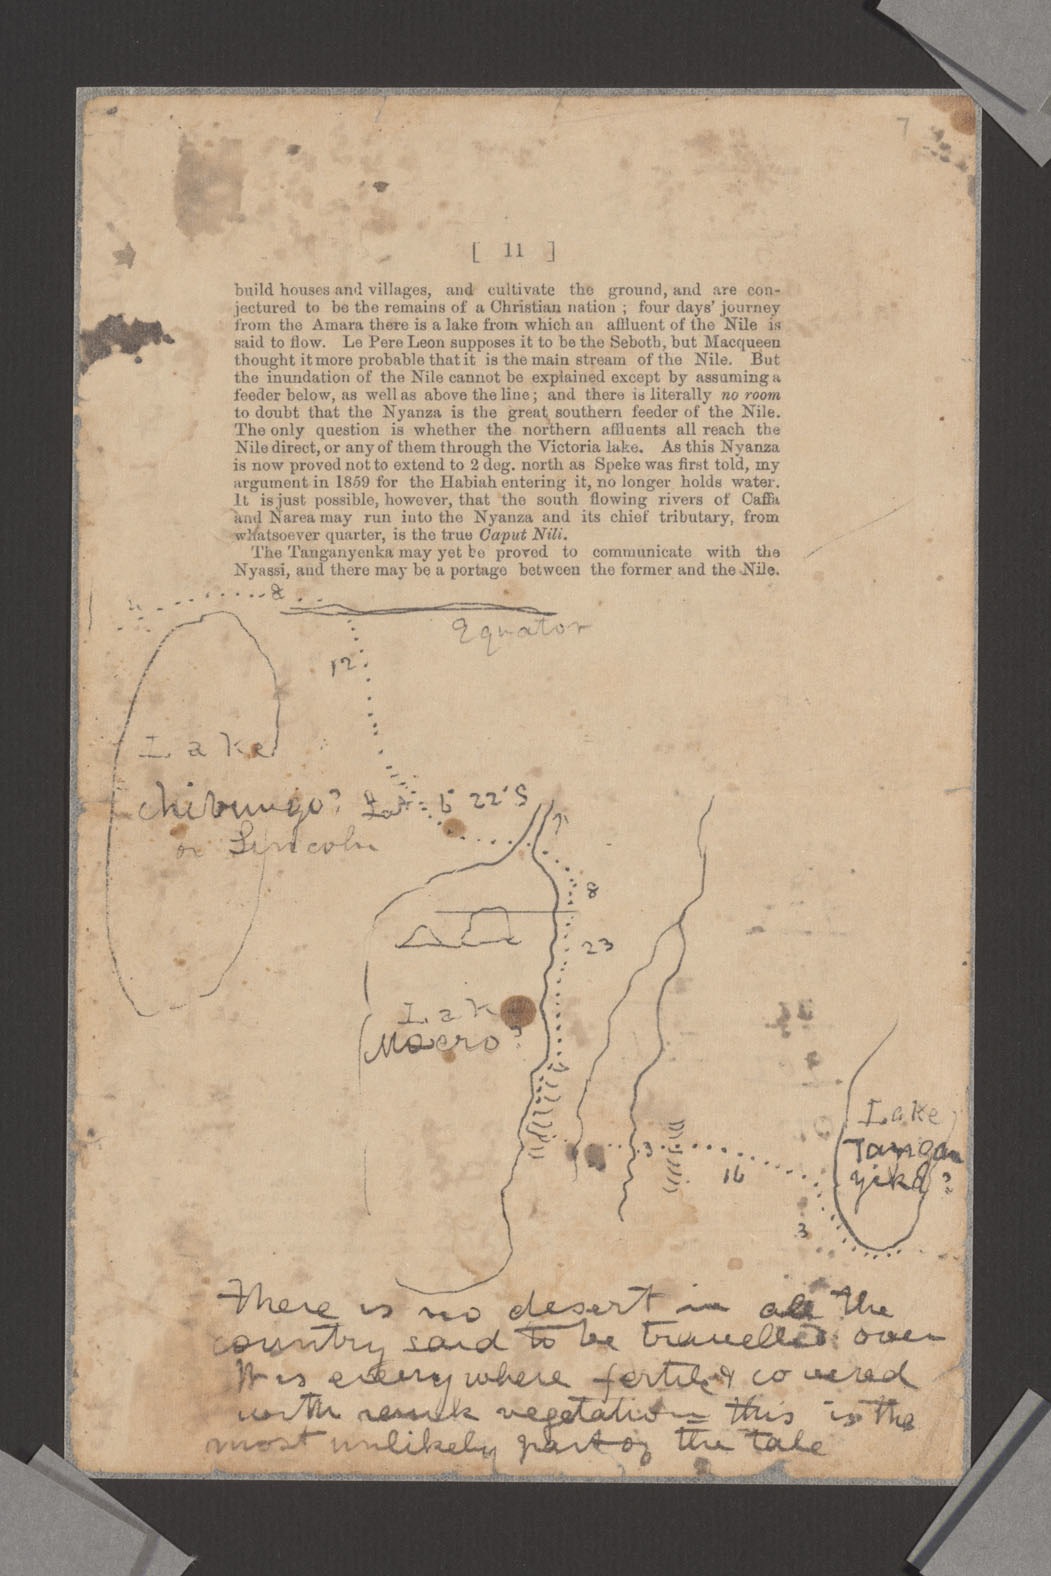 An image of a page of the 1870 Field Diary (Livingstone 1870k:[LXXVI v.2]). Copyright David Livingstone Centre. Creative Commons Attribution-NonCommercial 3.0 Unported (https://creativecommons.org/licenses/by-nc/3.0/).